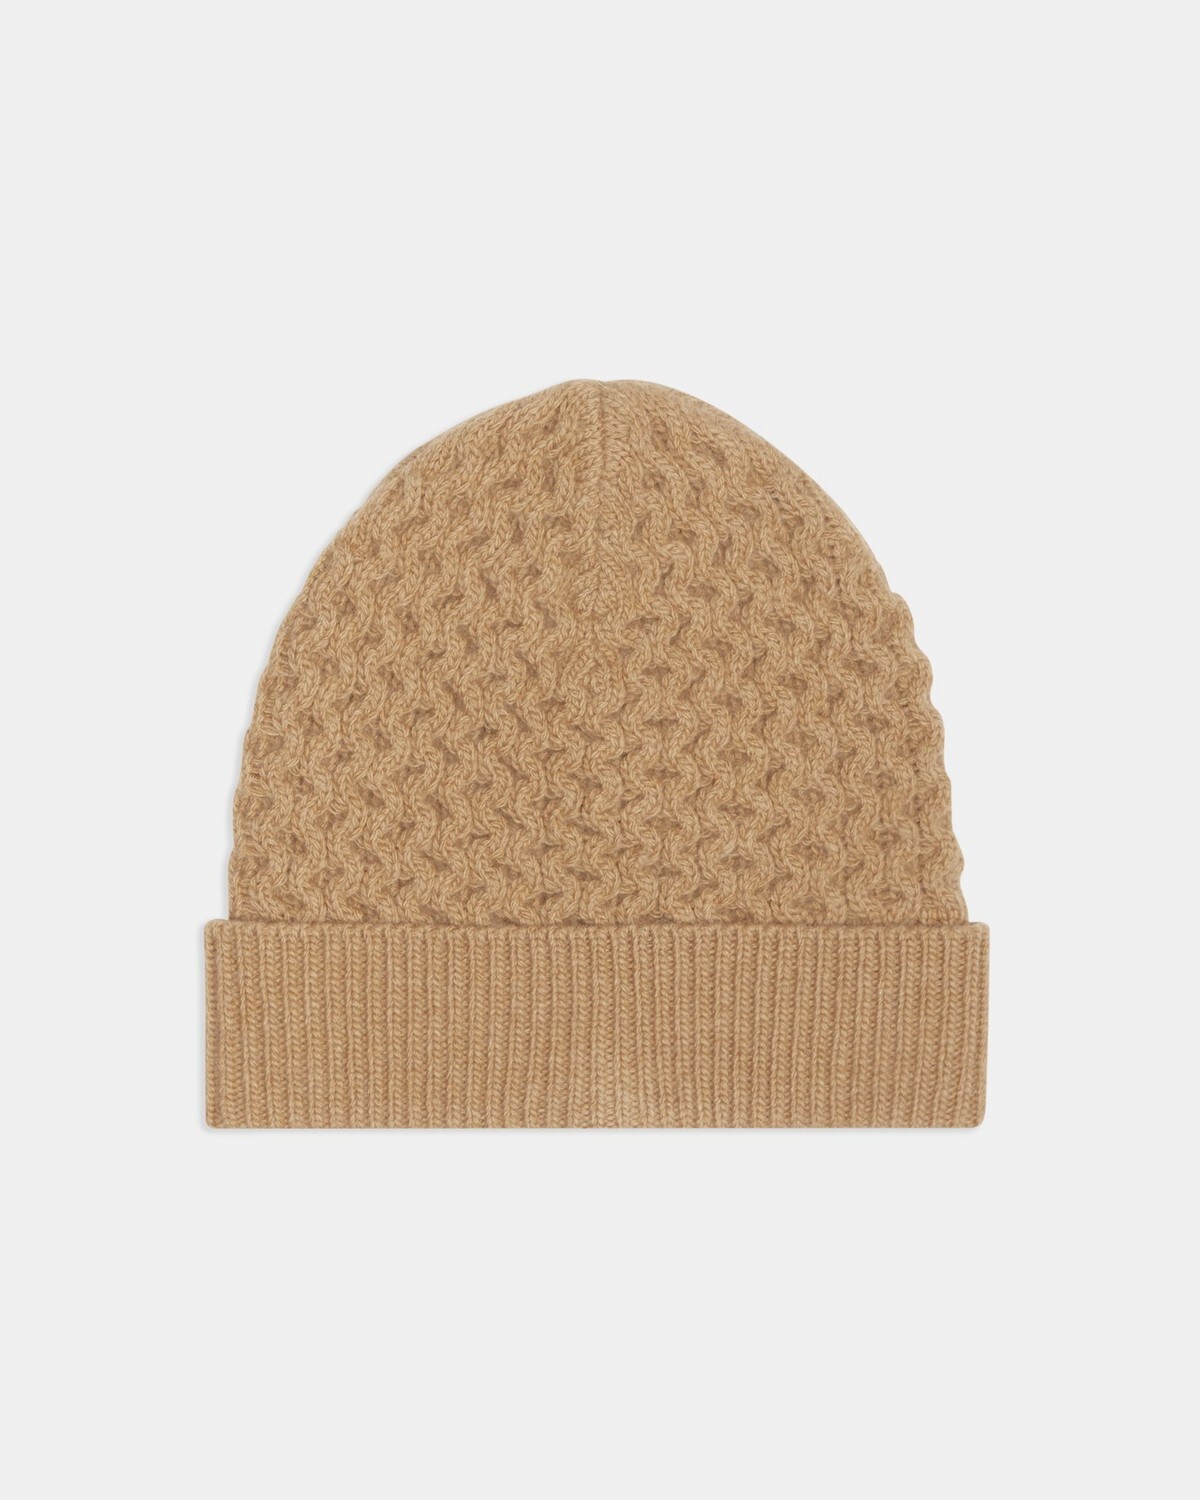 Theory Honeycomb Hat in Felted Wool-Cashmere